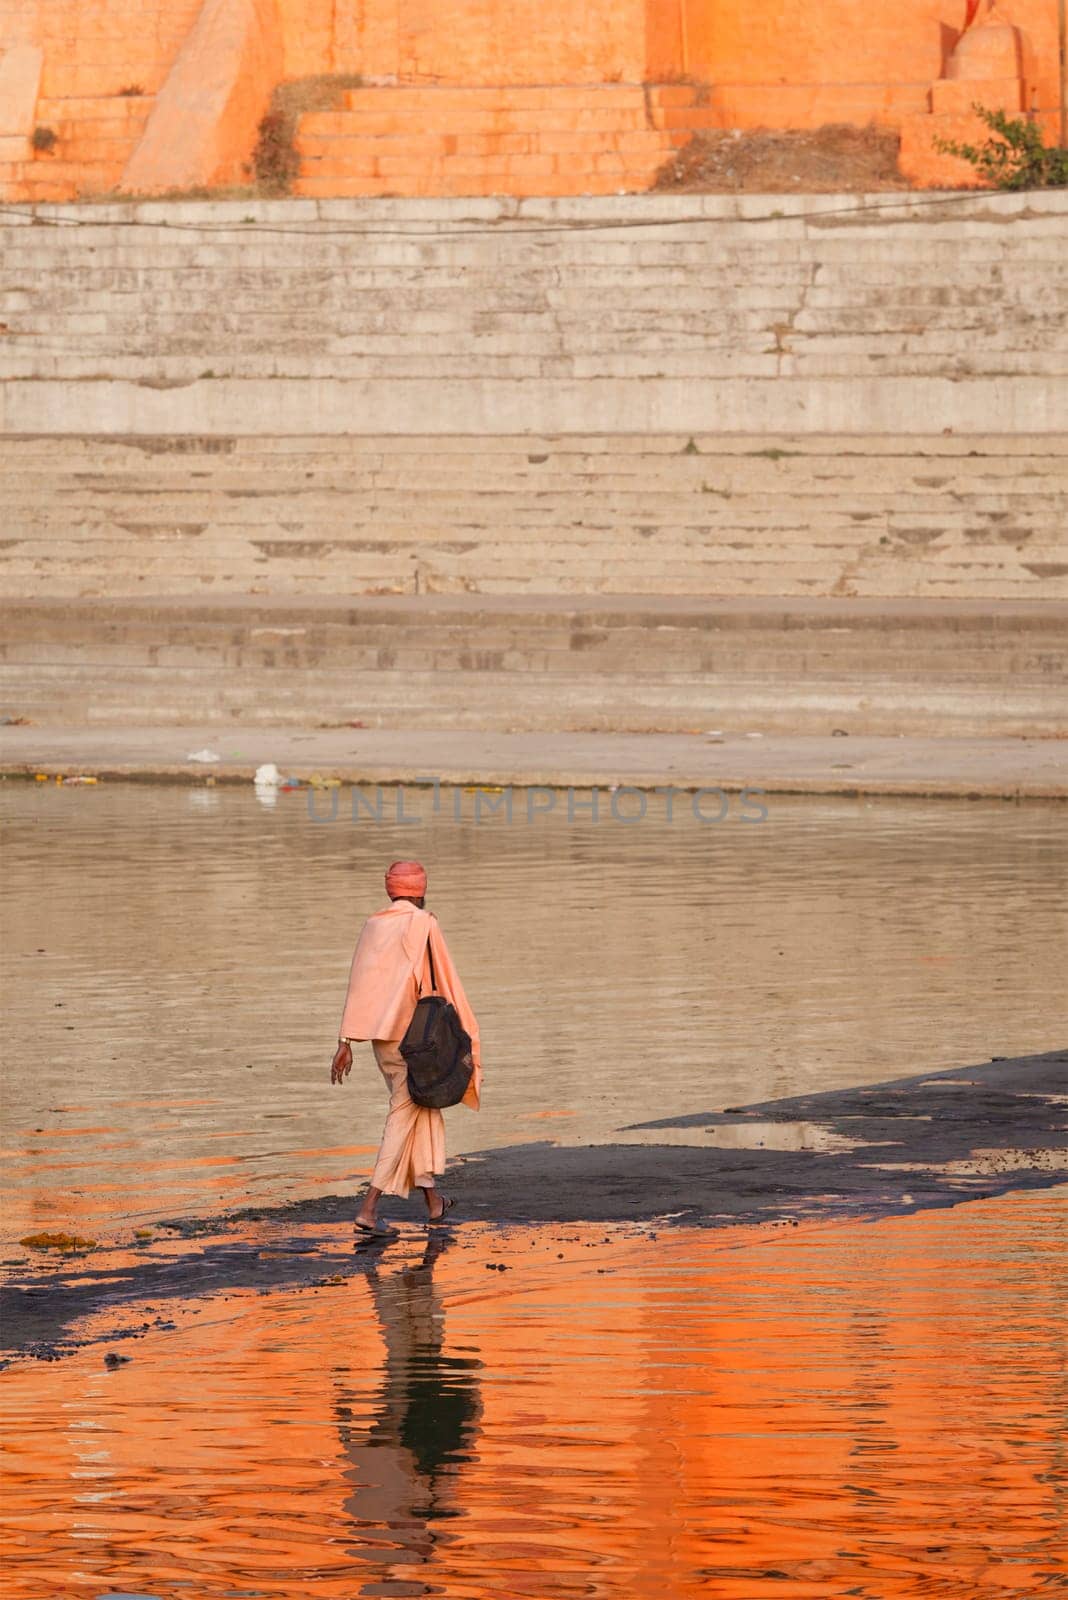 UJJAIN, INDIA - APRIL 25, 2011: Sadhu crossing holy Kshipra river. Shipra is one of the sacred rivers in Hinduism